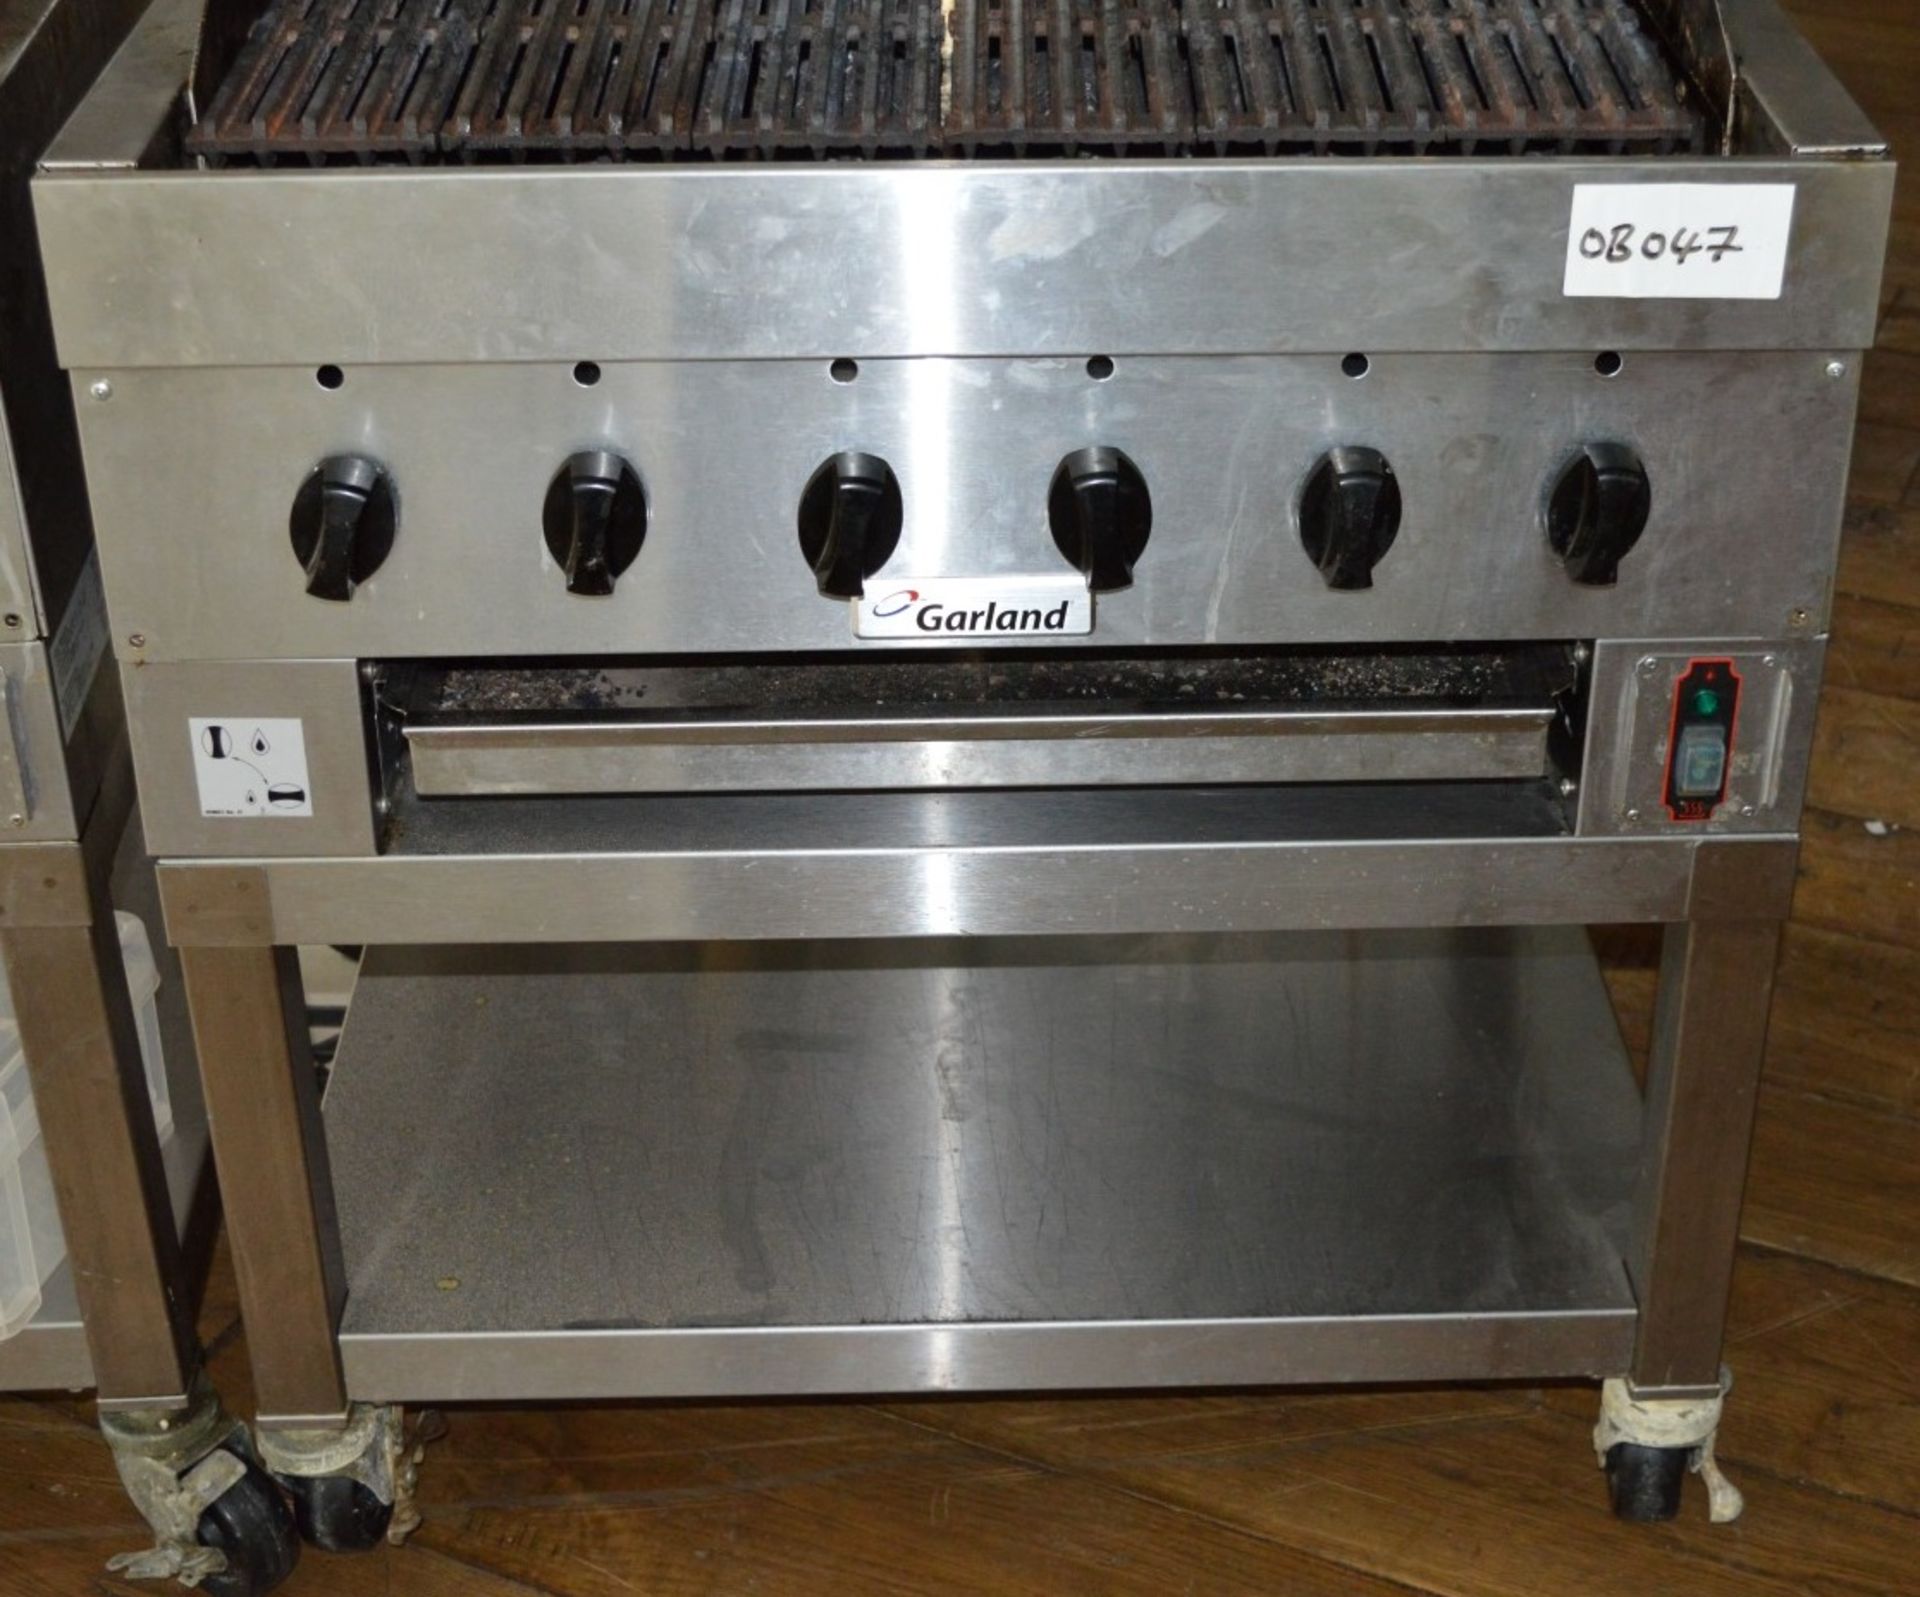 1 x Garland Griddle With Stand - H91 x W85 x D75cms - Stainless Steel - CL245 - Dual Fuel Gas and - Image 2 of 5